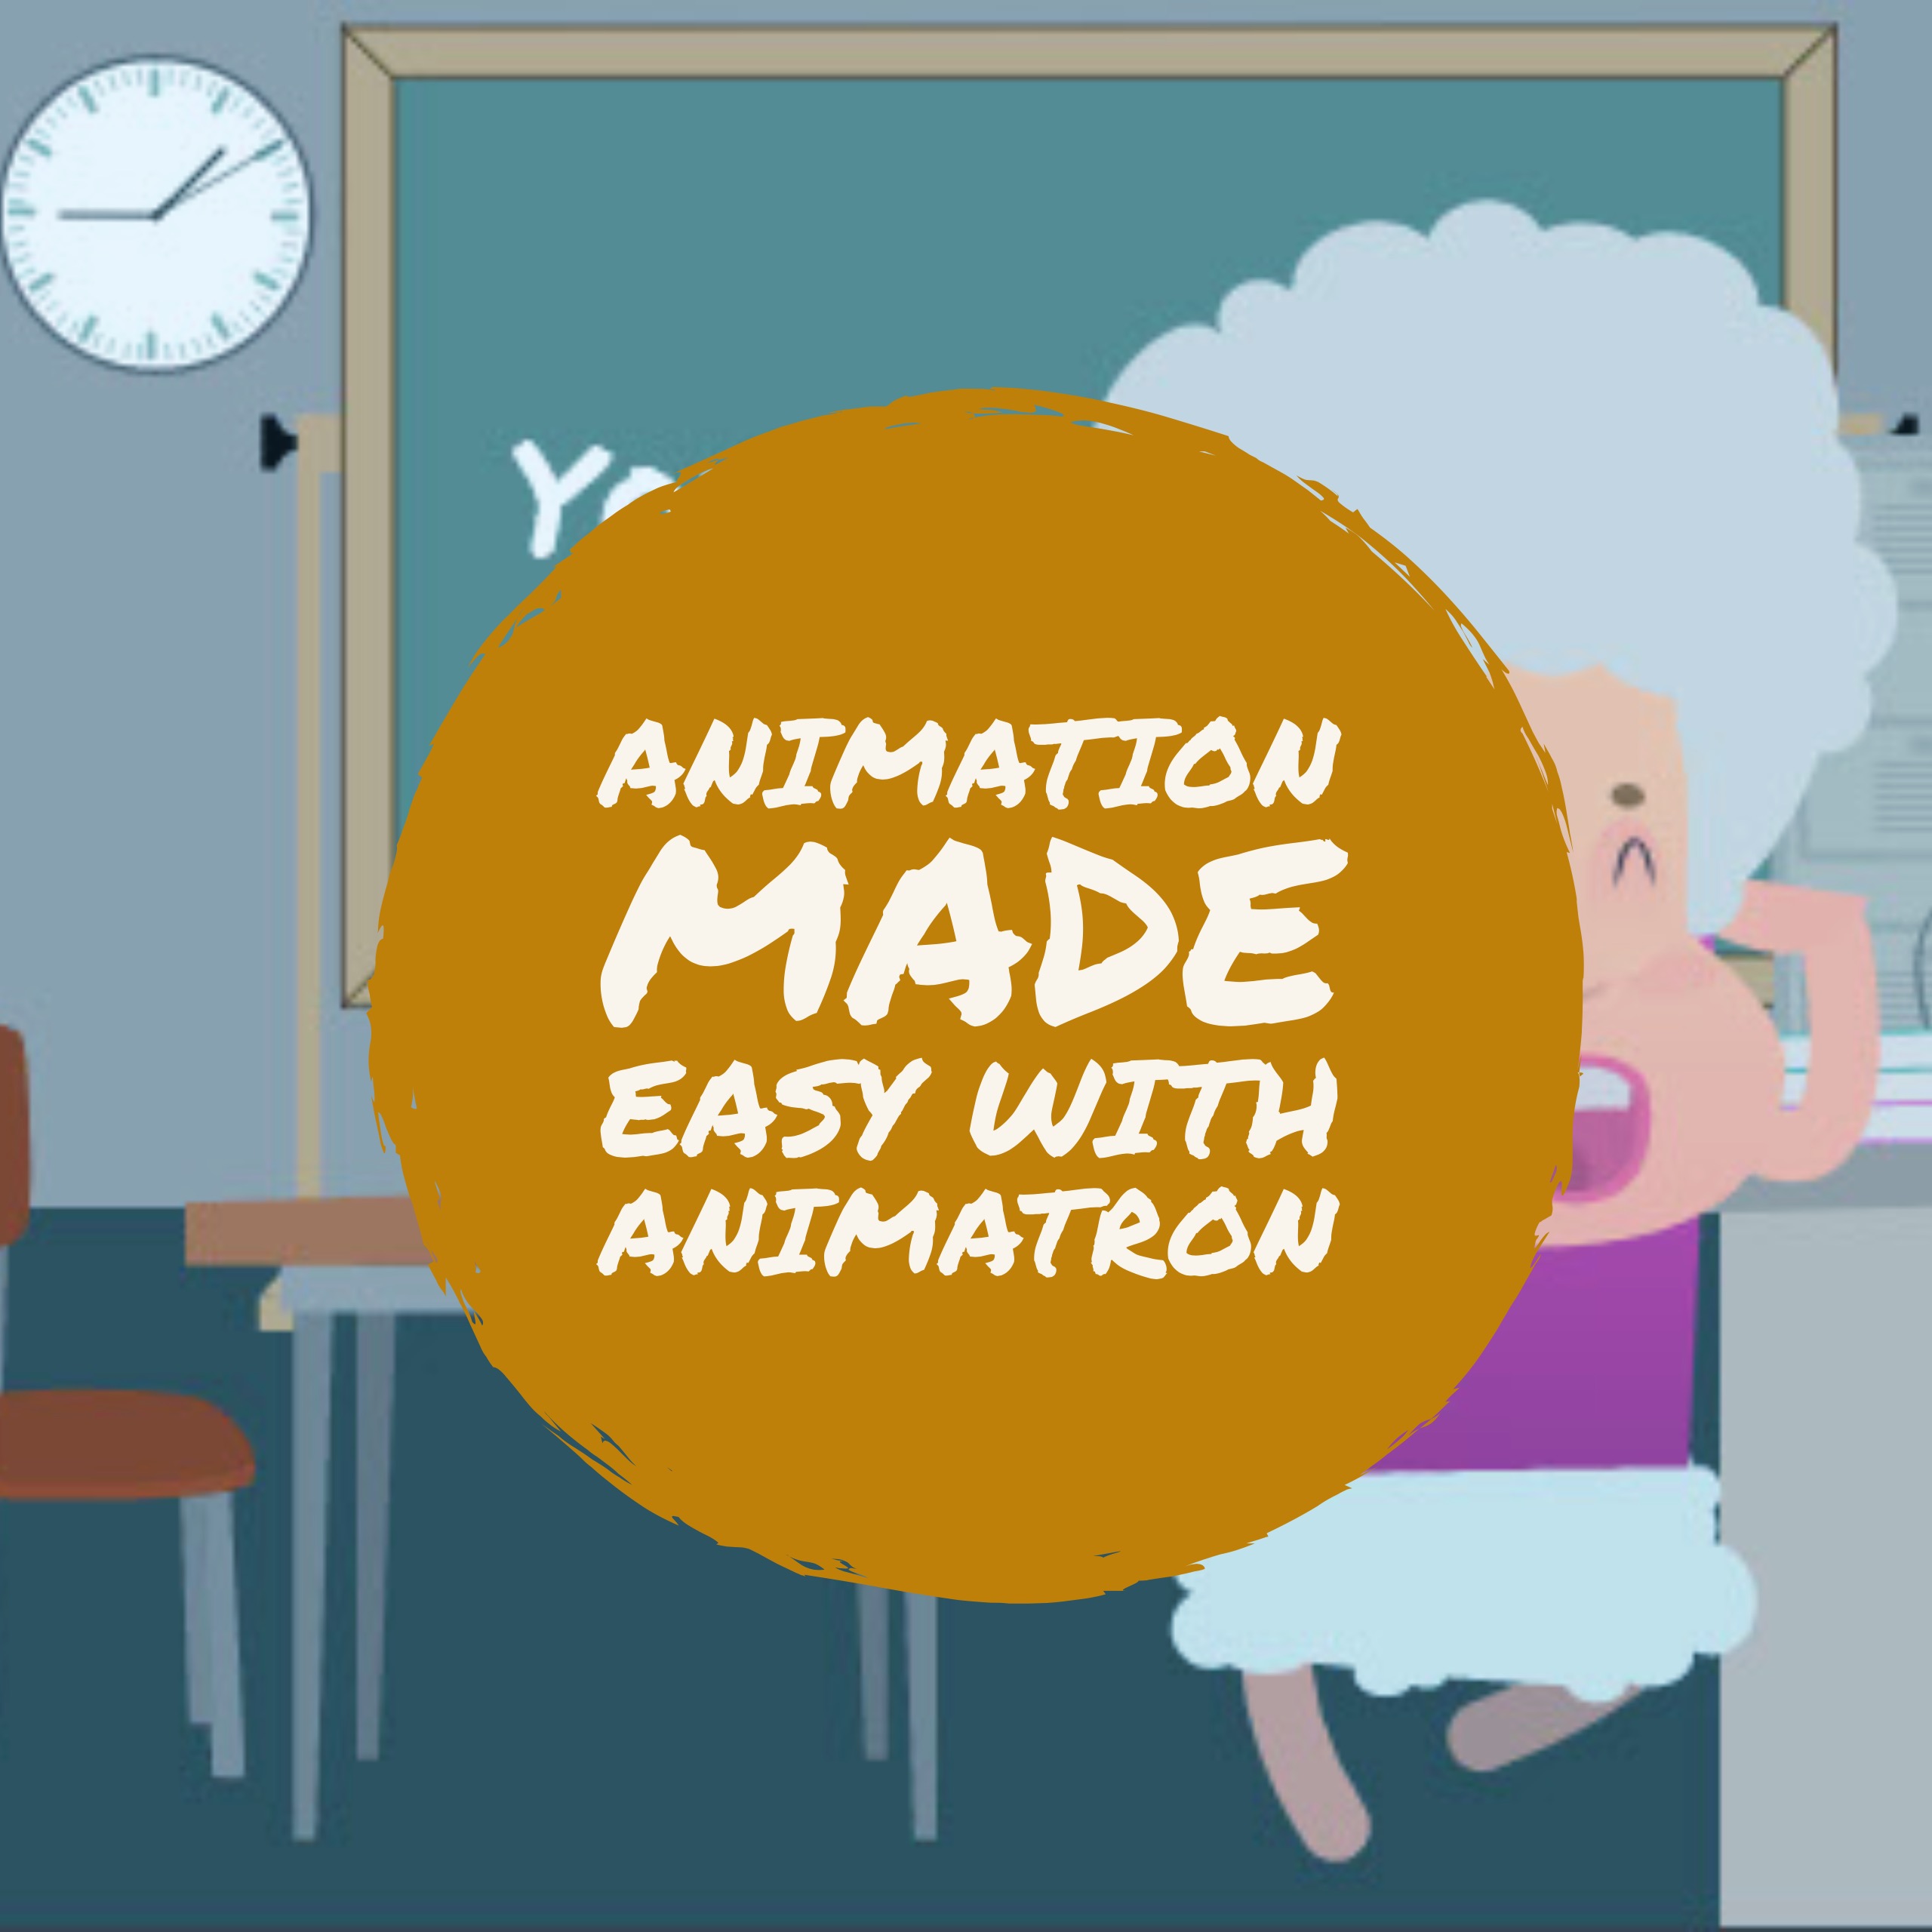 Animation made easy with Animatron